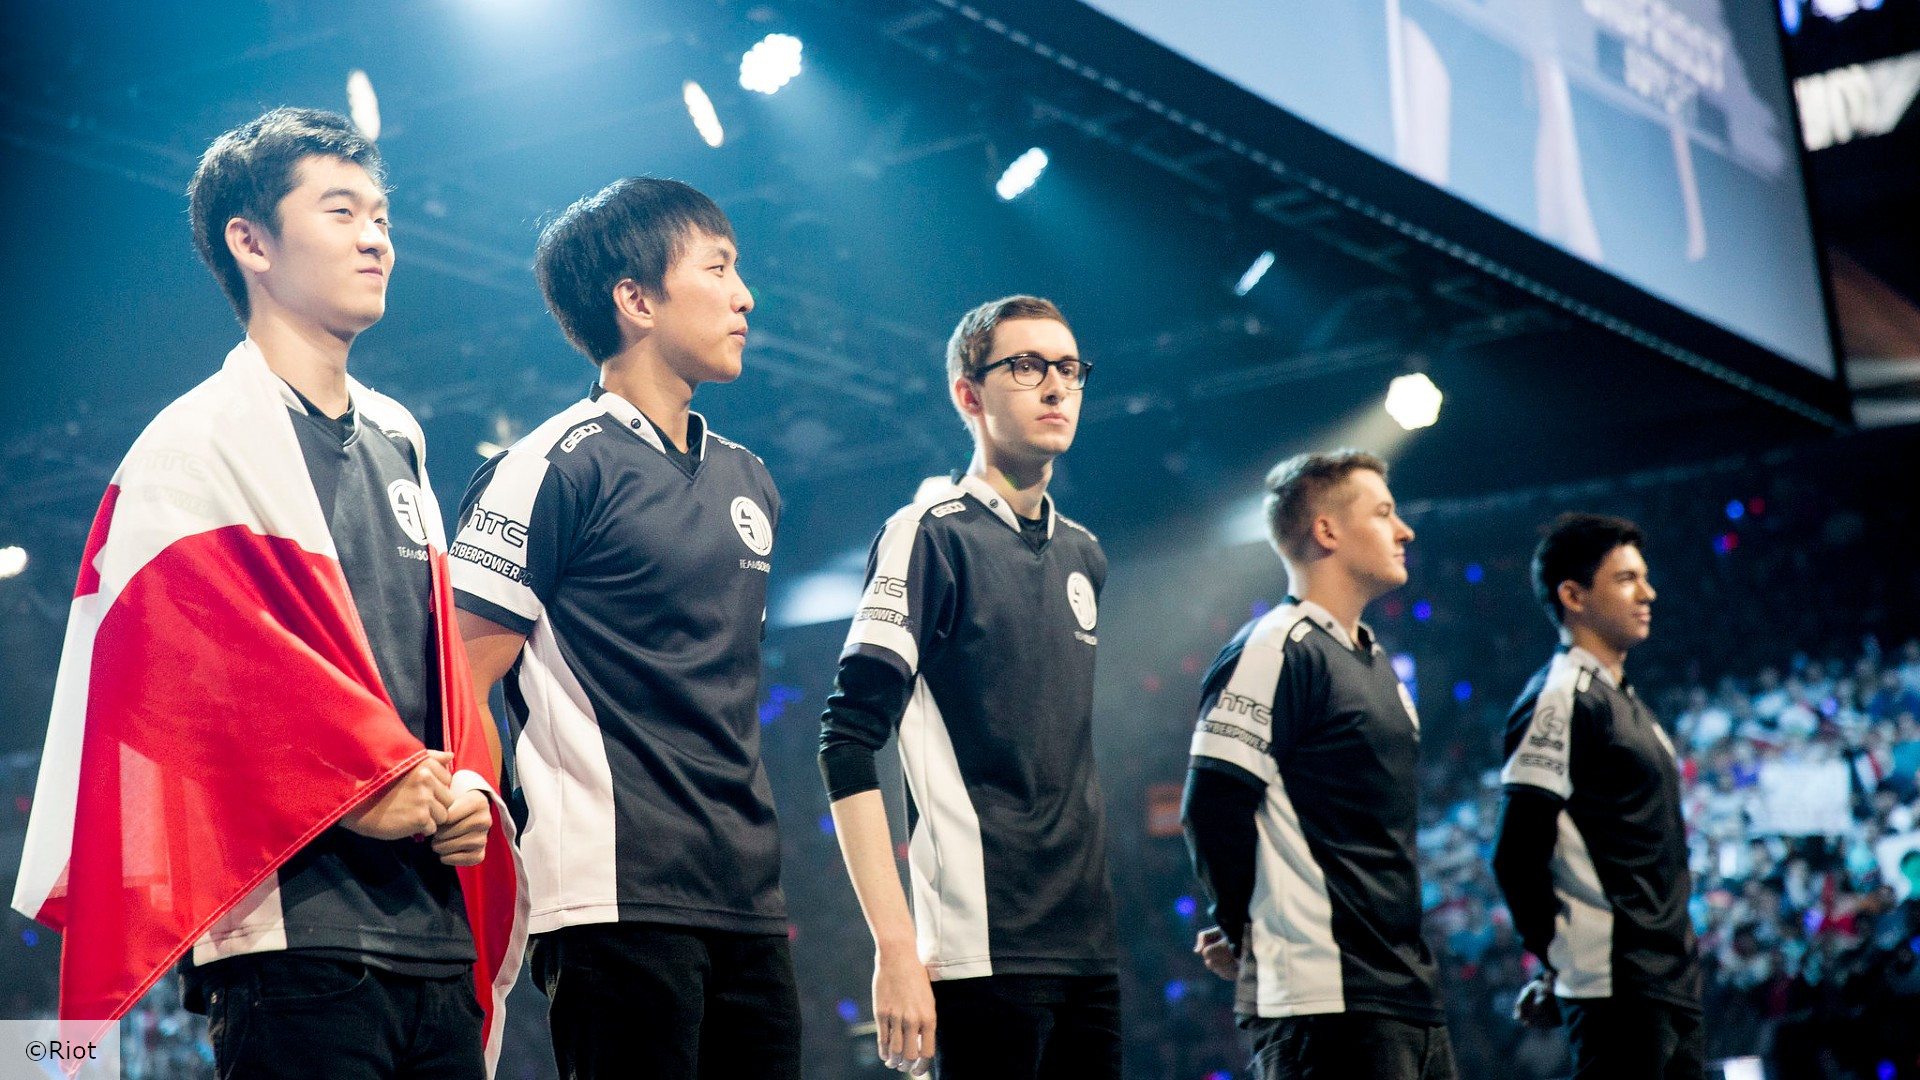 Tsm Tsm Teamsolomid Twitter You can find more details by going to